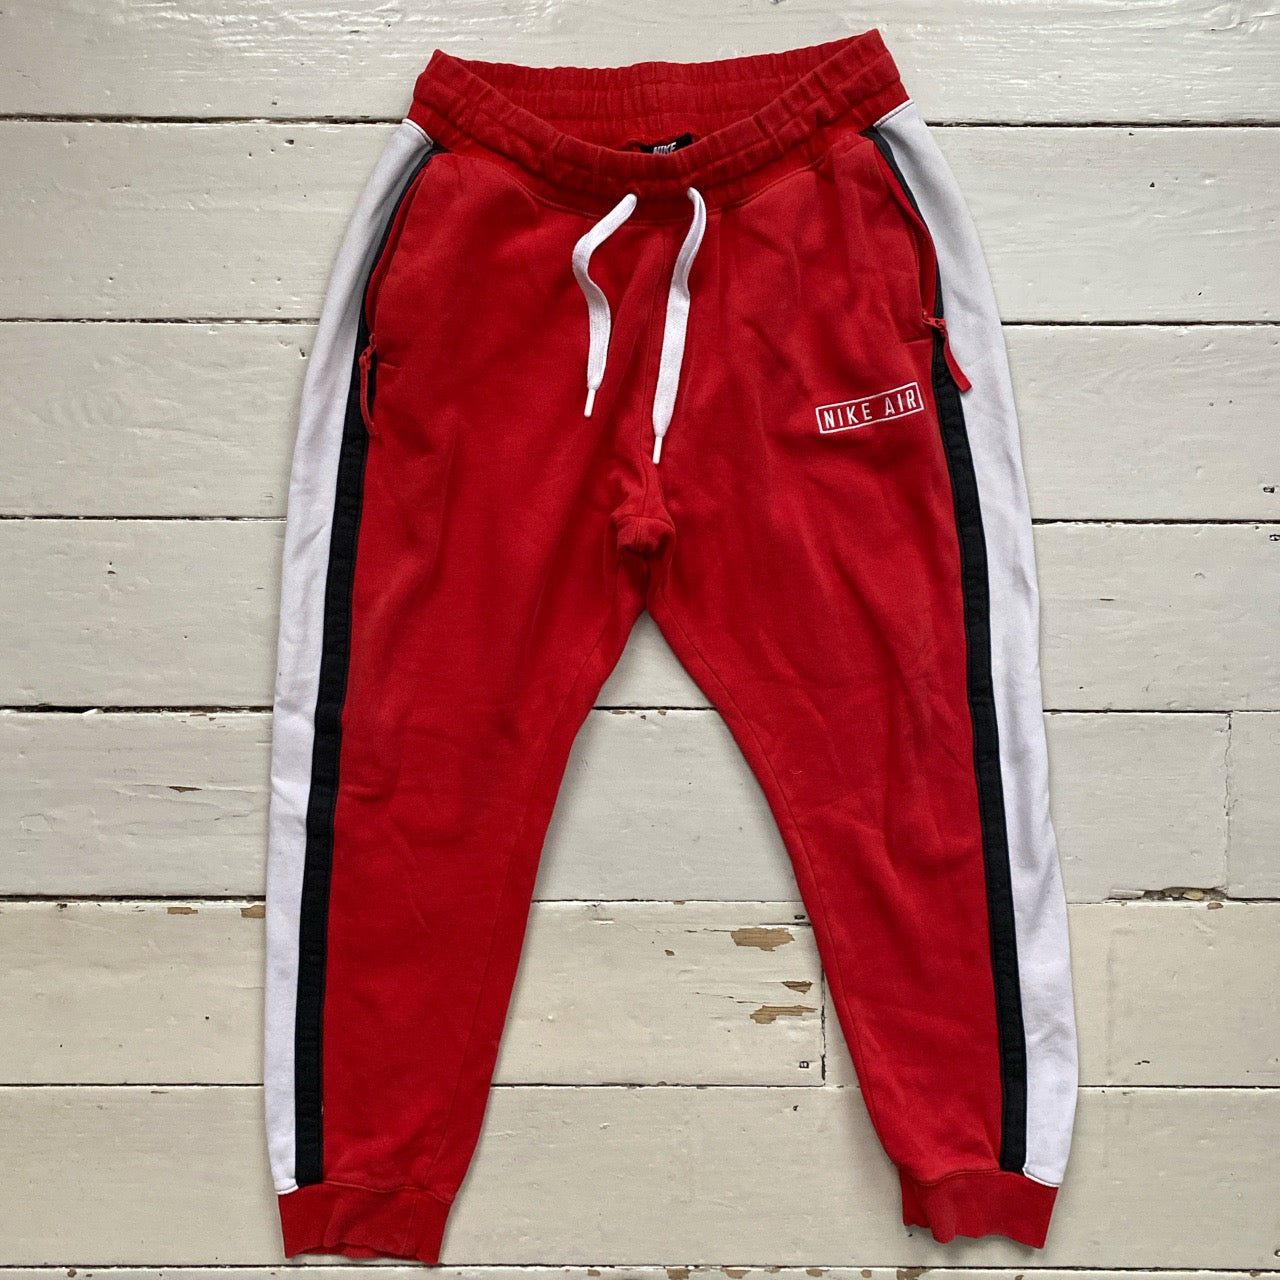 Nike Air Red Tracksuit (Large both)